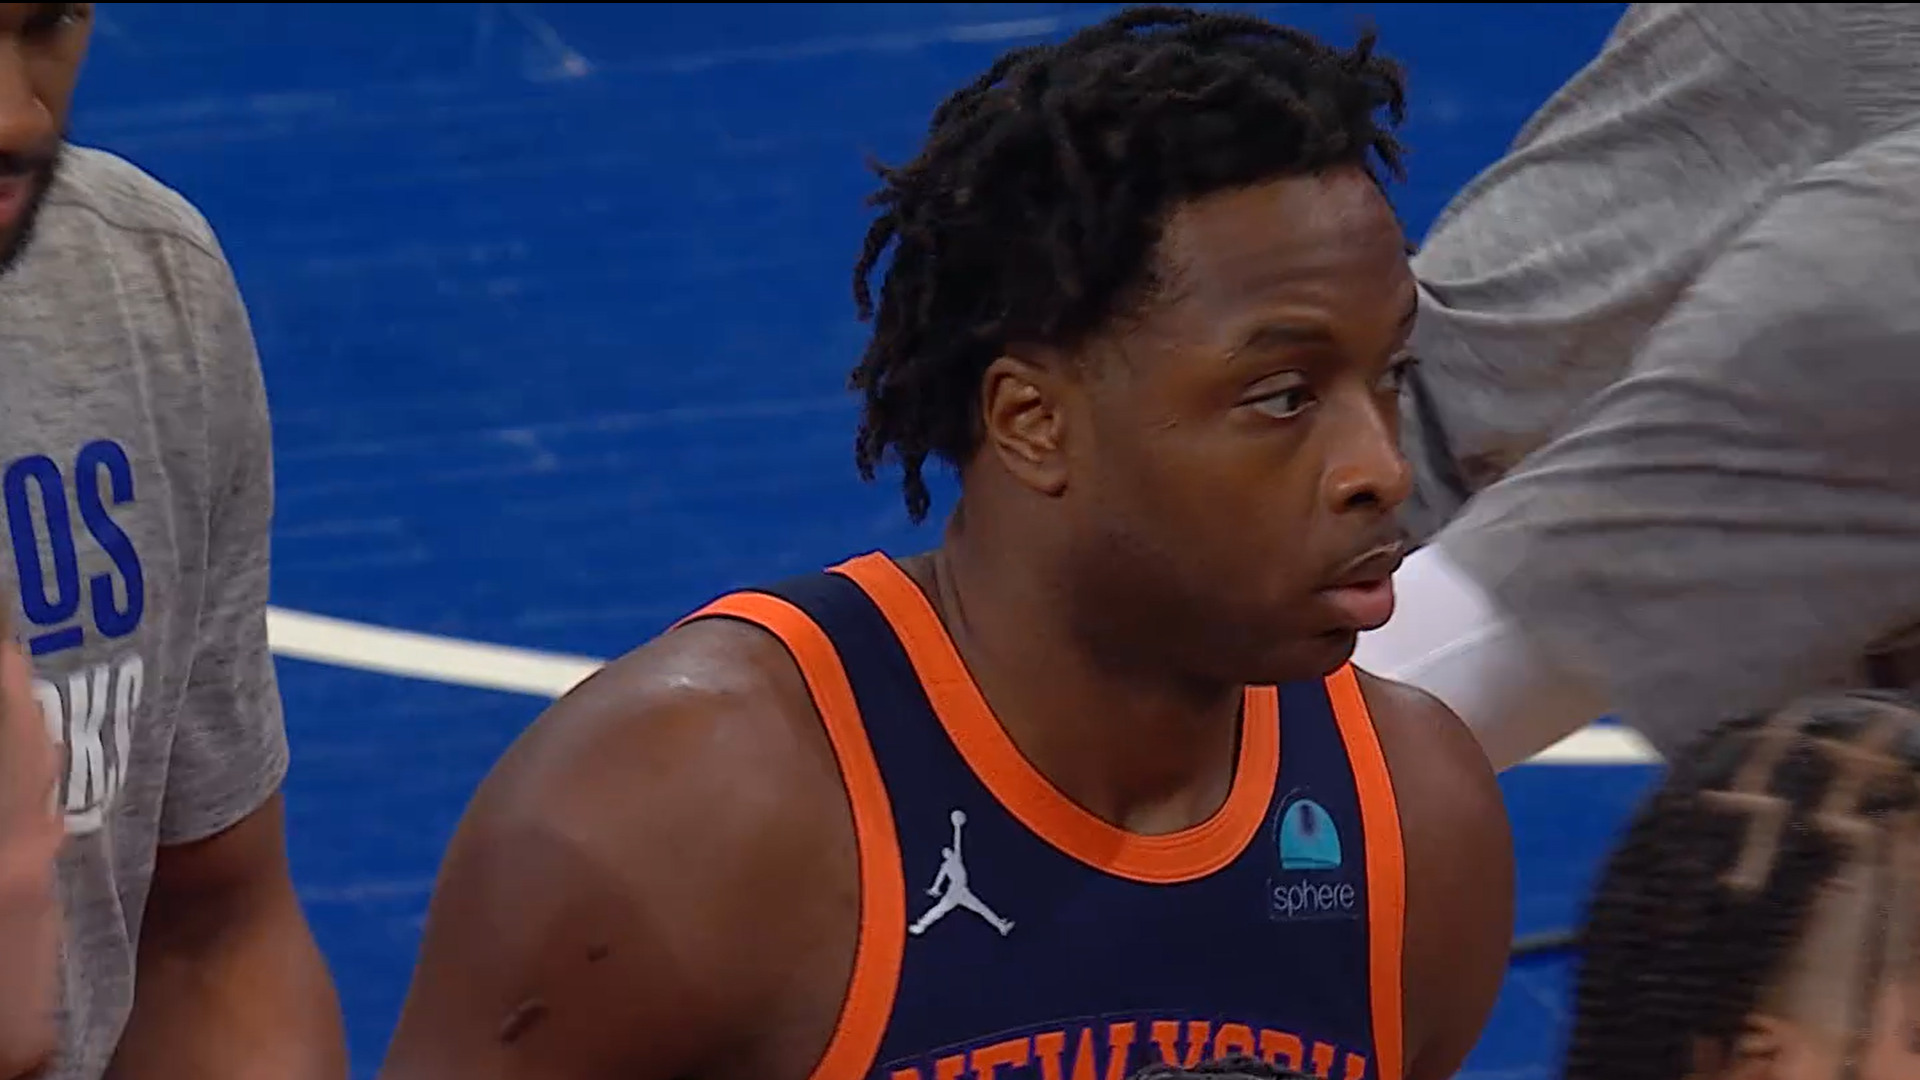 OG Anunoby (Knicks) loses Game 3 vs. Pacers